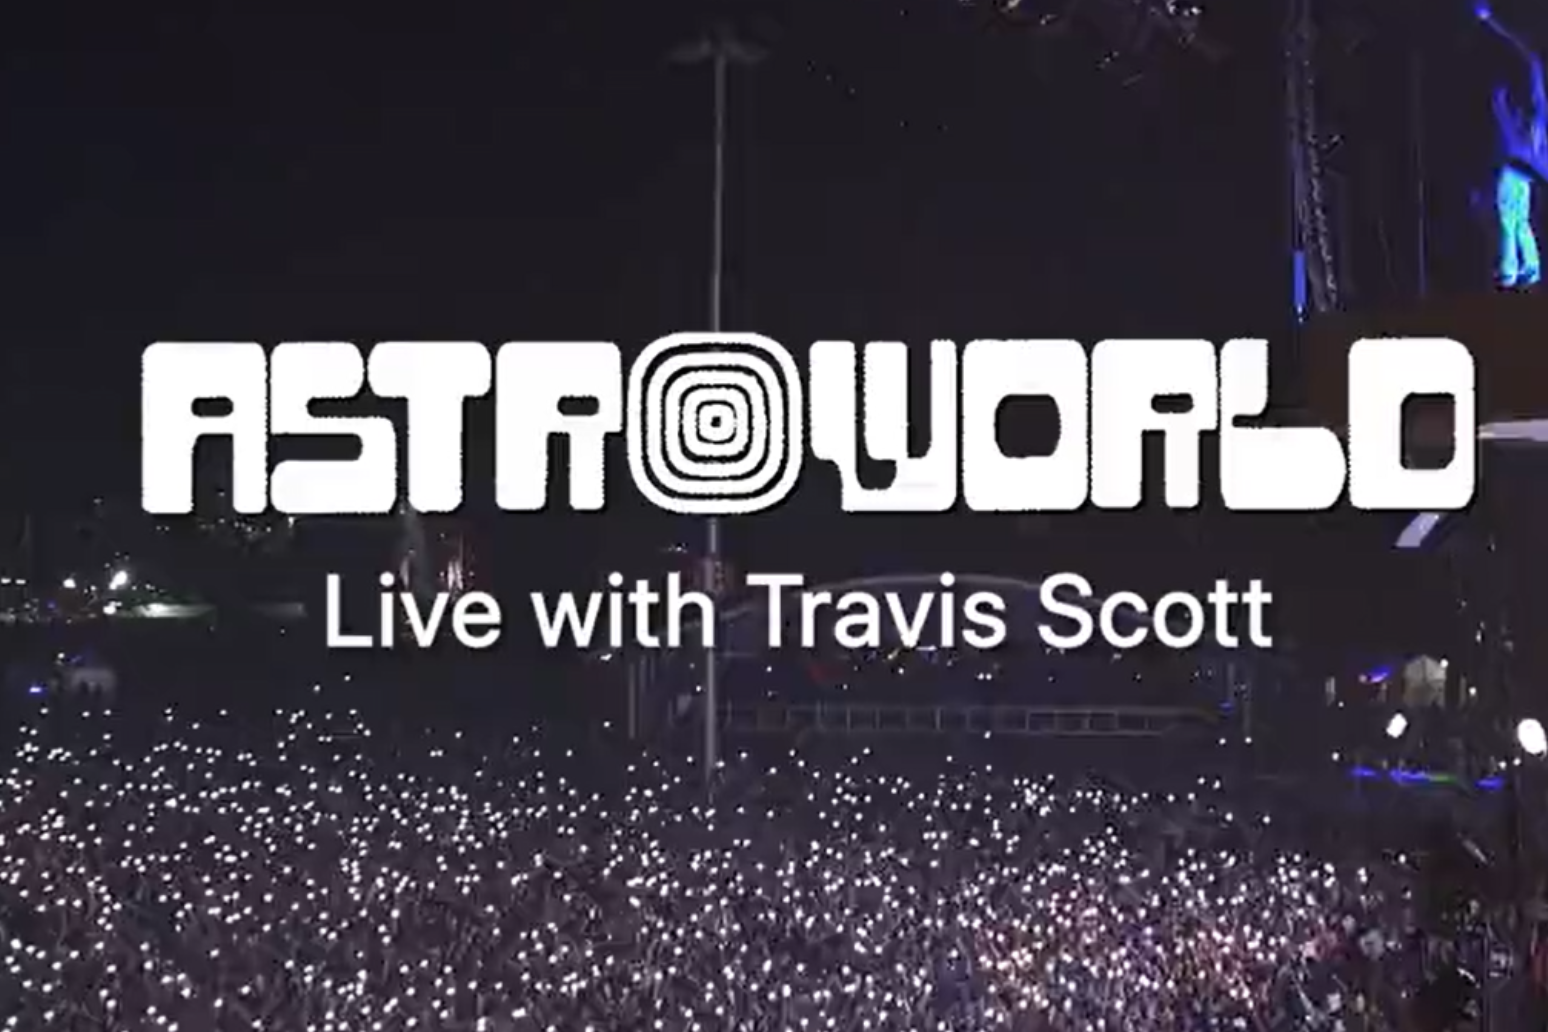 Eight dead and several injured after crowd surge at Astroworld Festival in Texas 